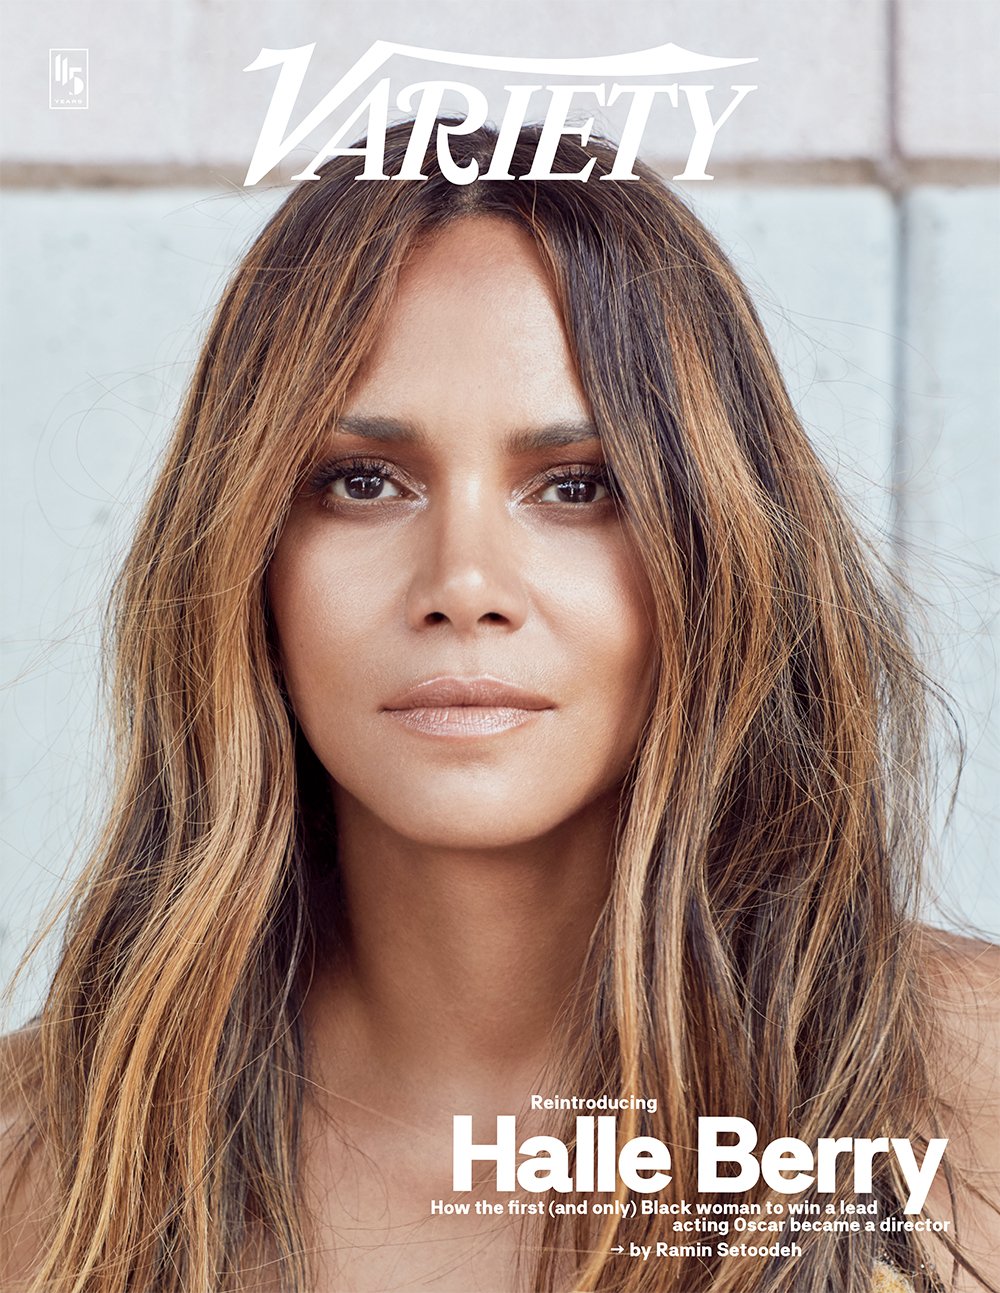 halle-berry-variety-cover-forweb.jpg